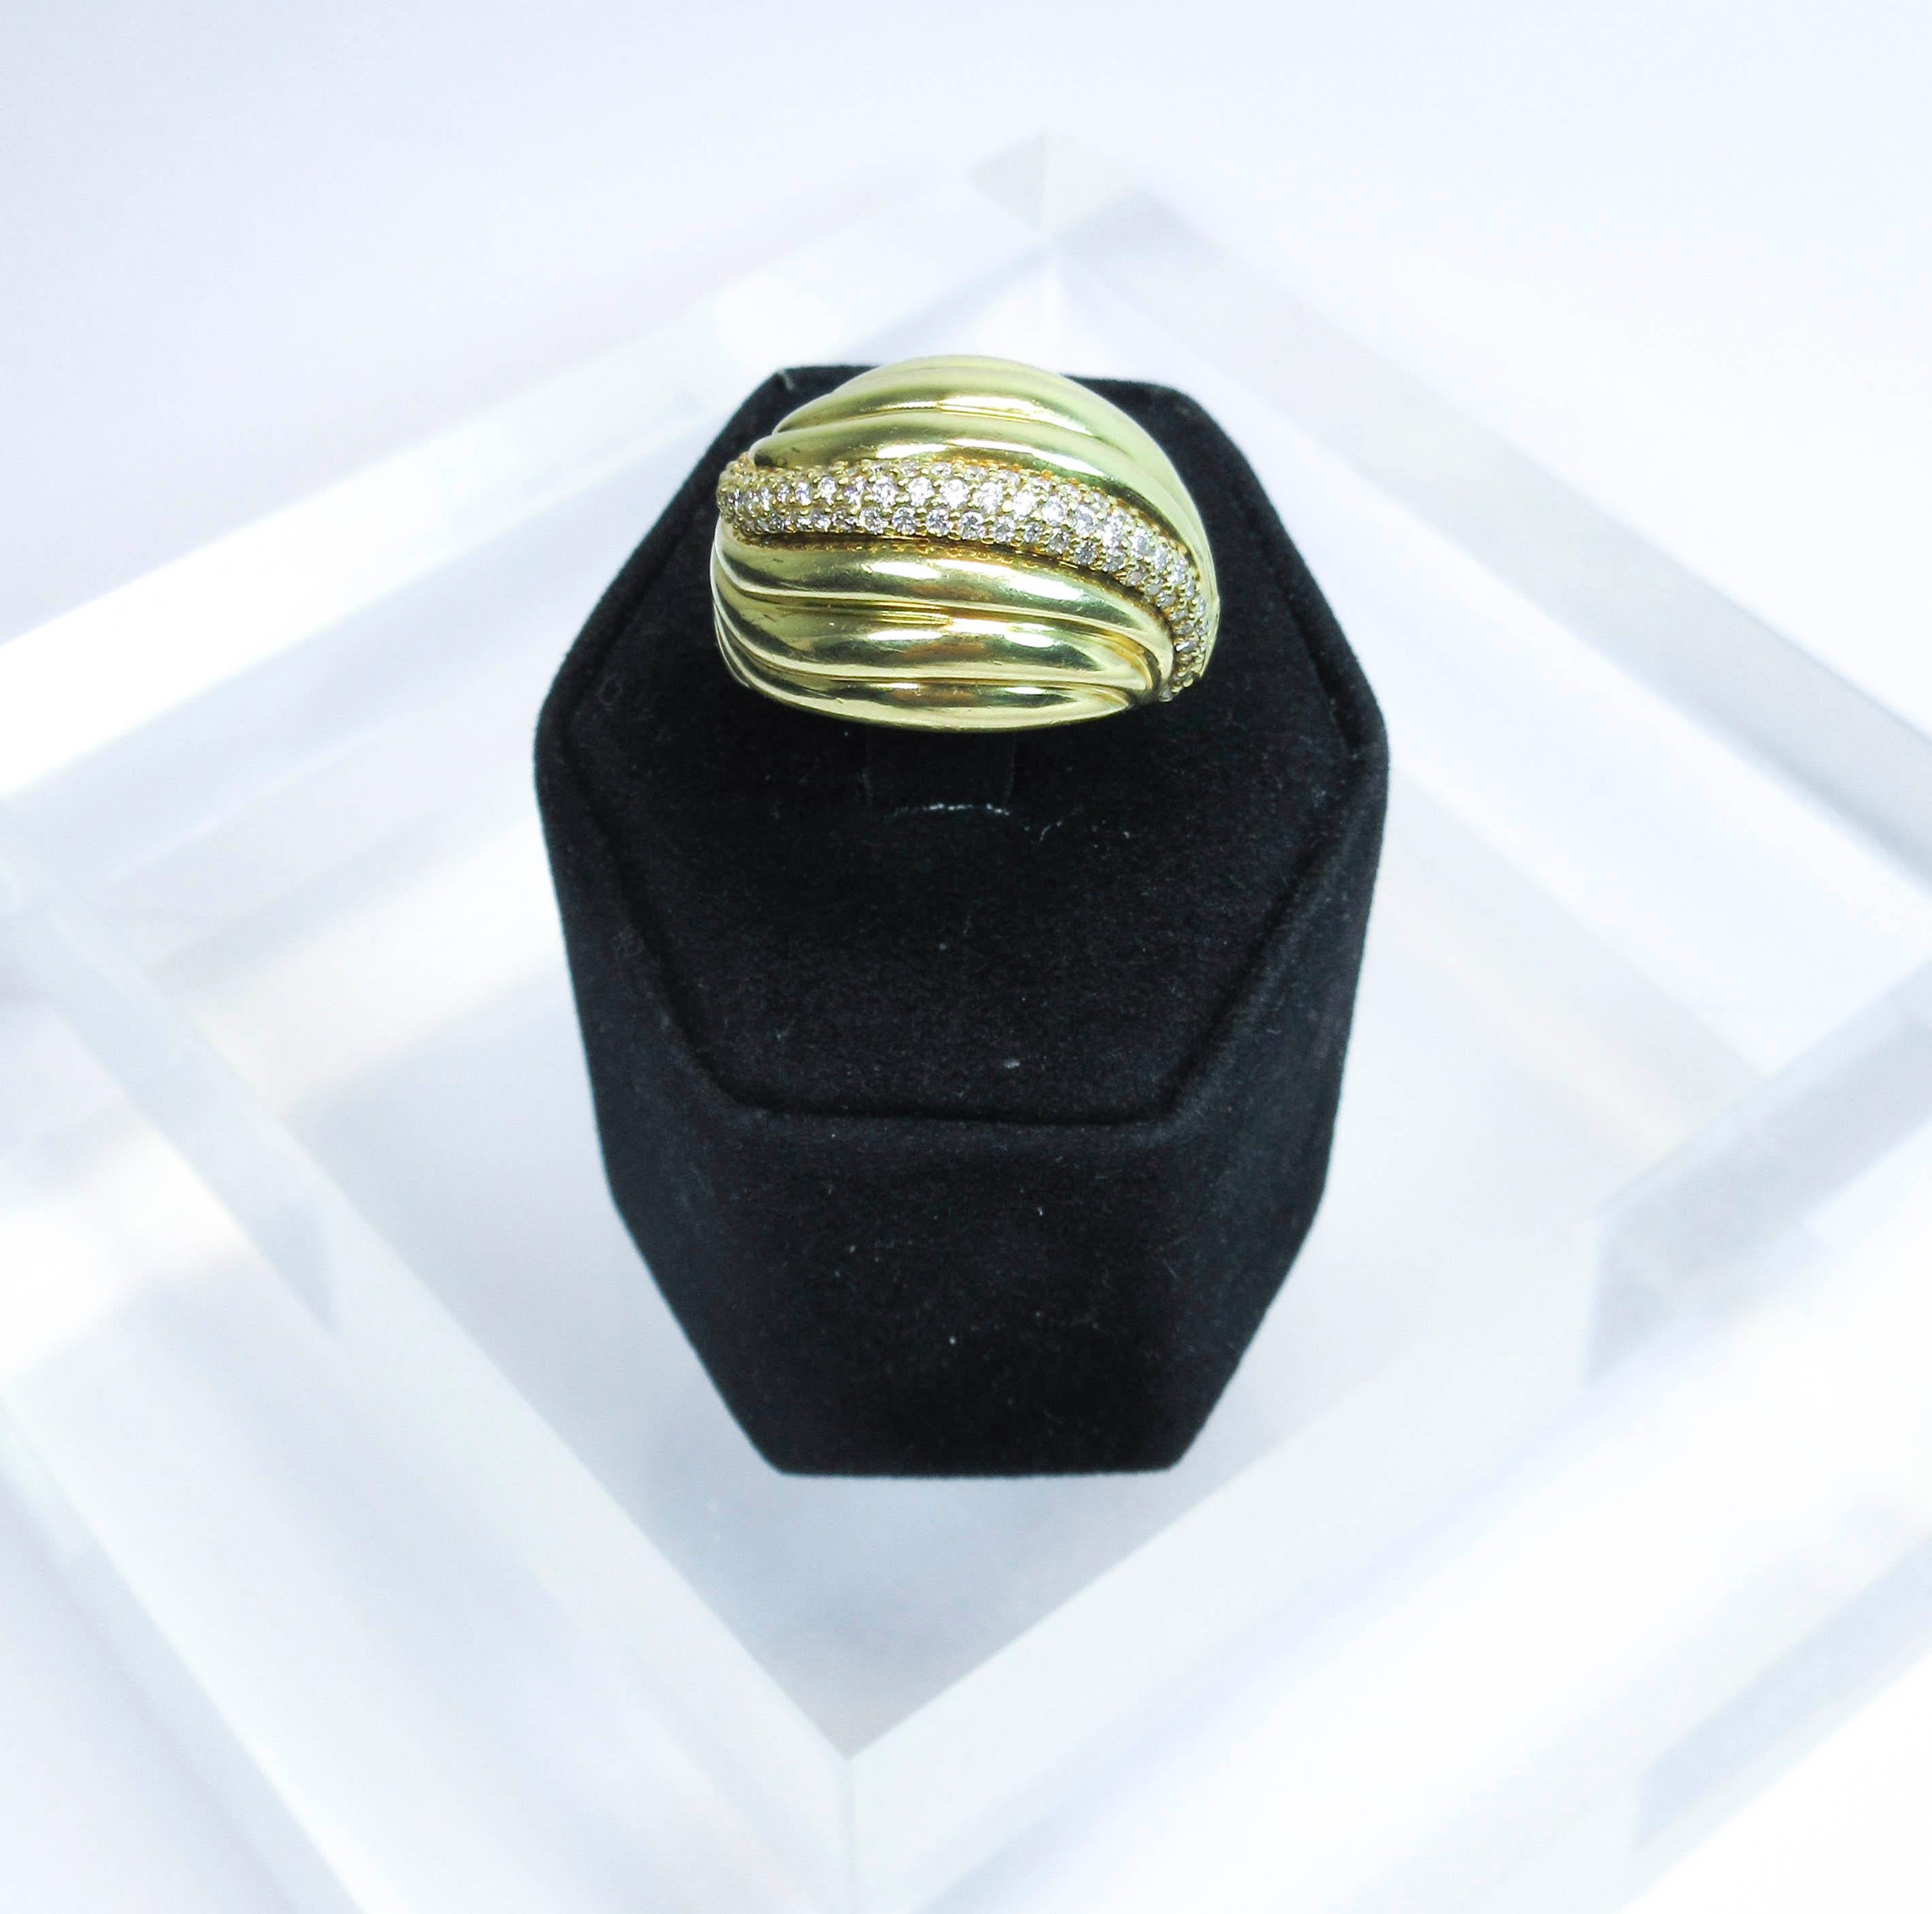 This David Yurman design is composed of 18kt yellow gold and features diamond accents. Size 7.5. Please feel free to ask any additional questions you may have.